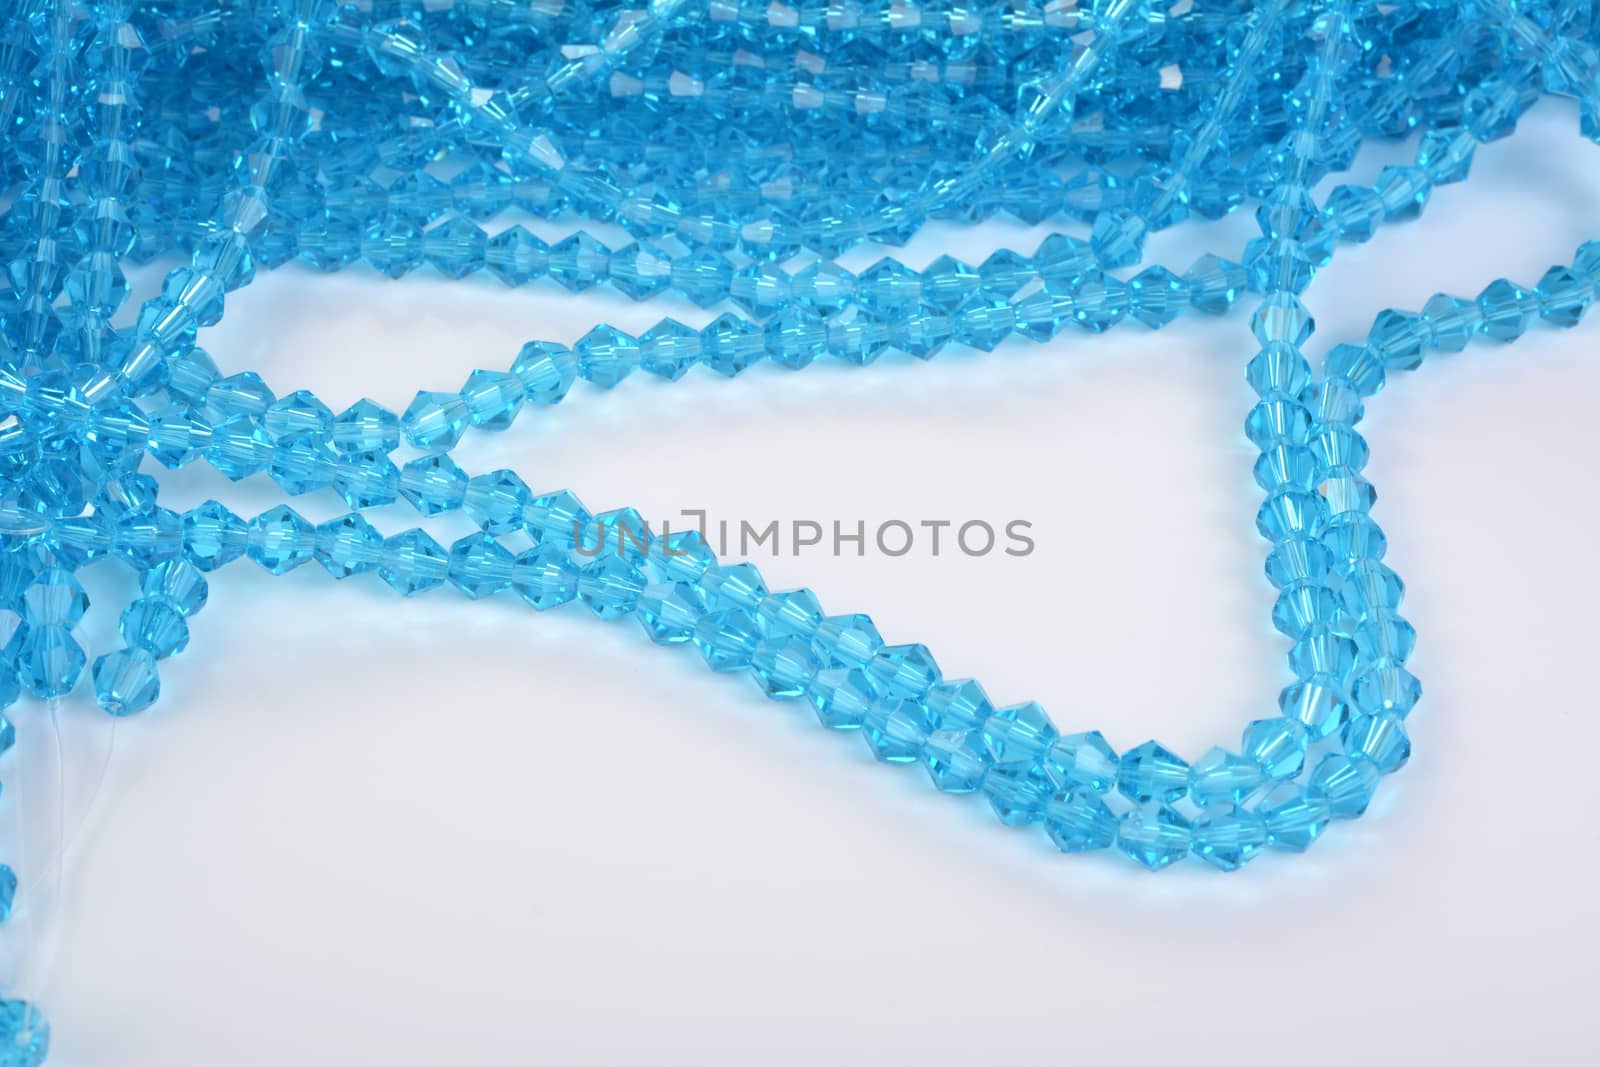 Beautiful Light Blue Glass Sparkle Crystal Isoalted Beads on white background. Use for diy beaded jewelry. Space for text